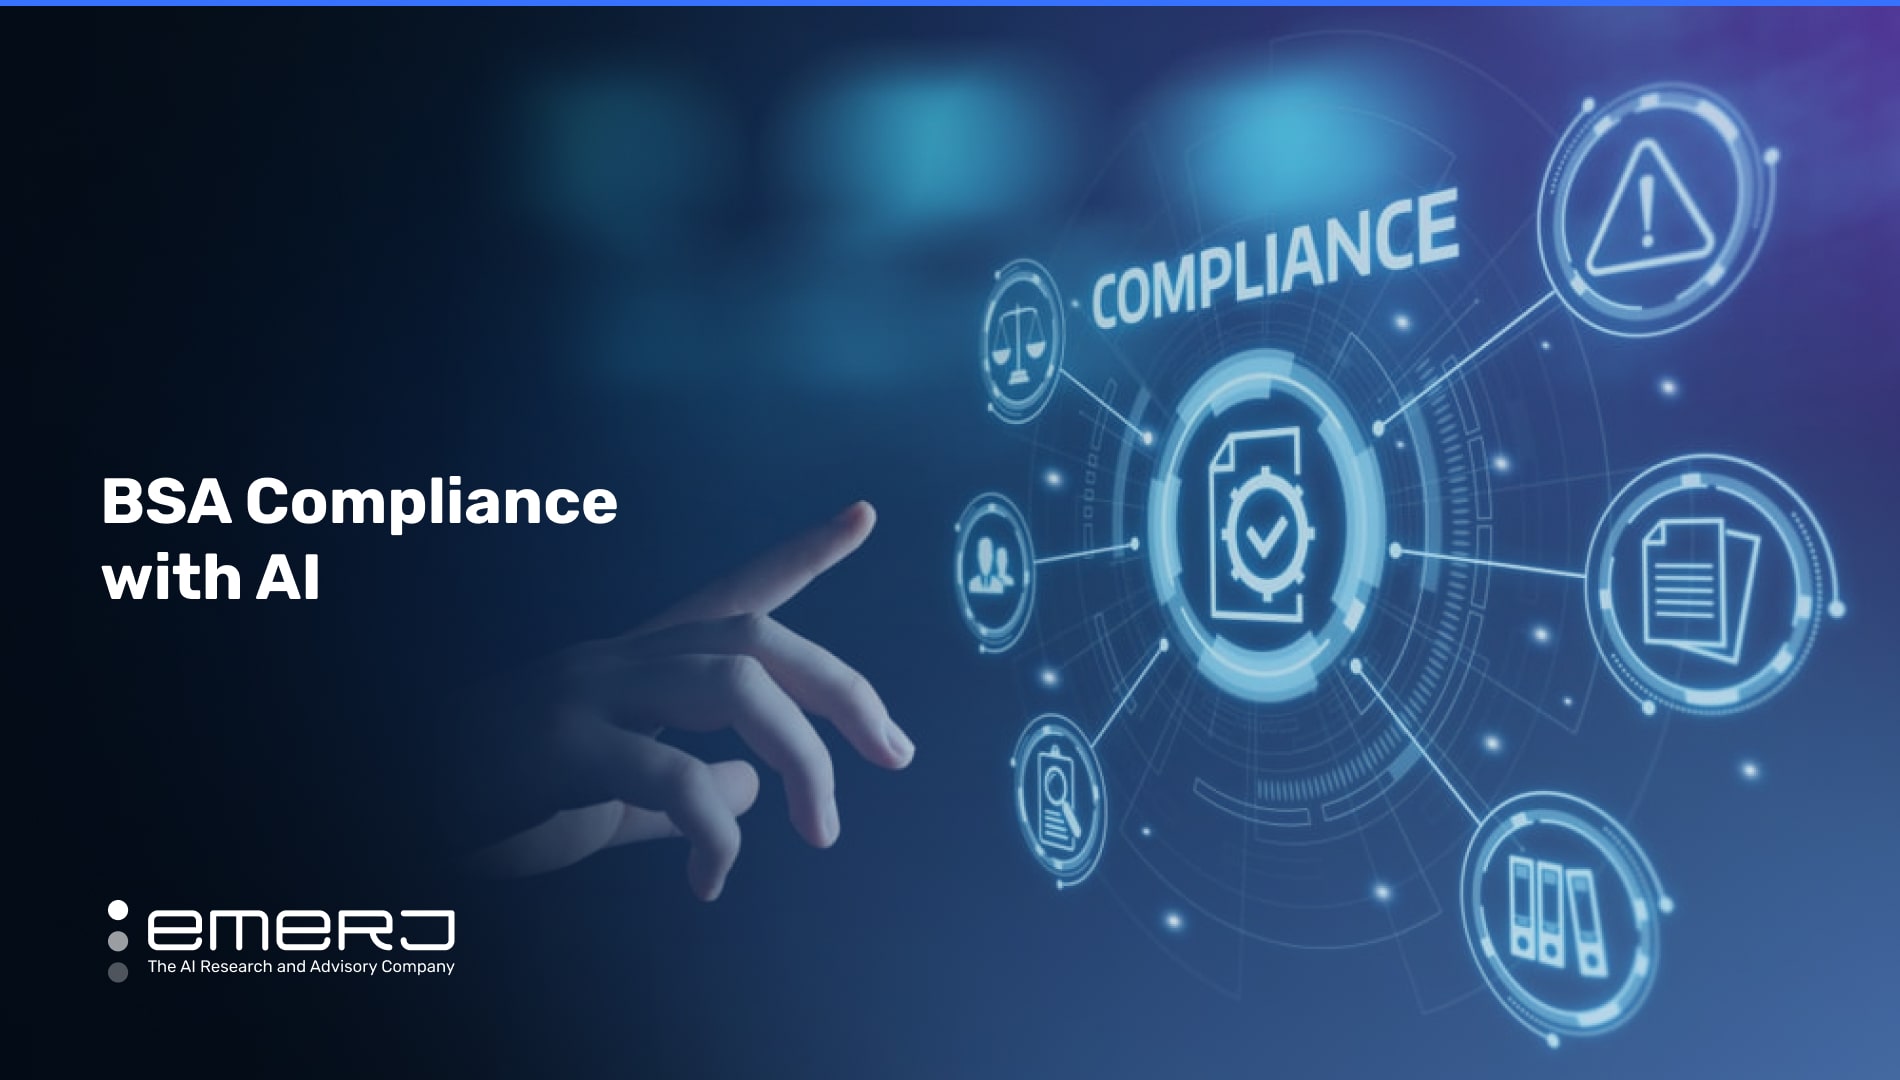 BSA Compliance with AI – Three Use Cases